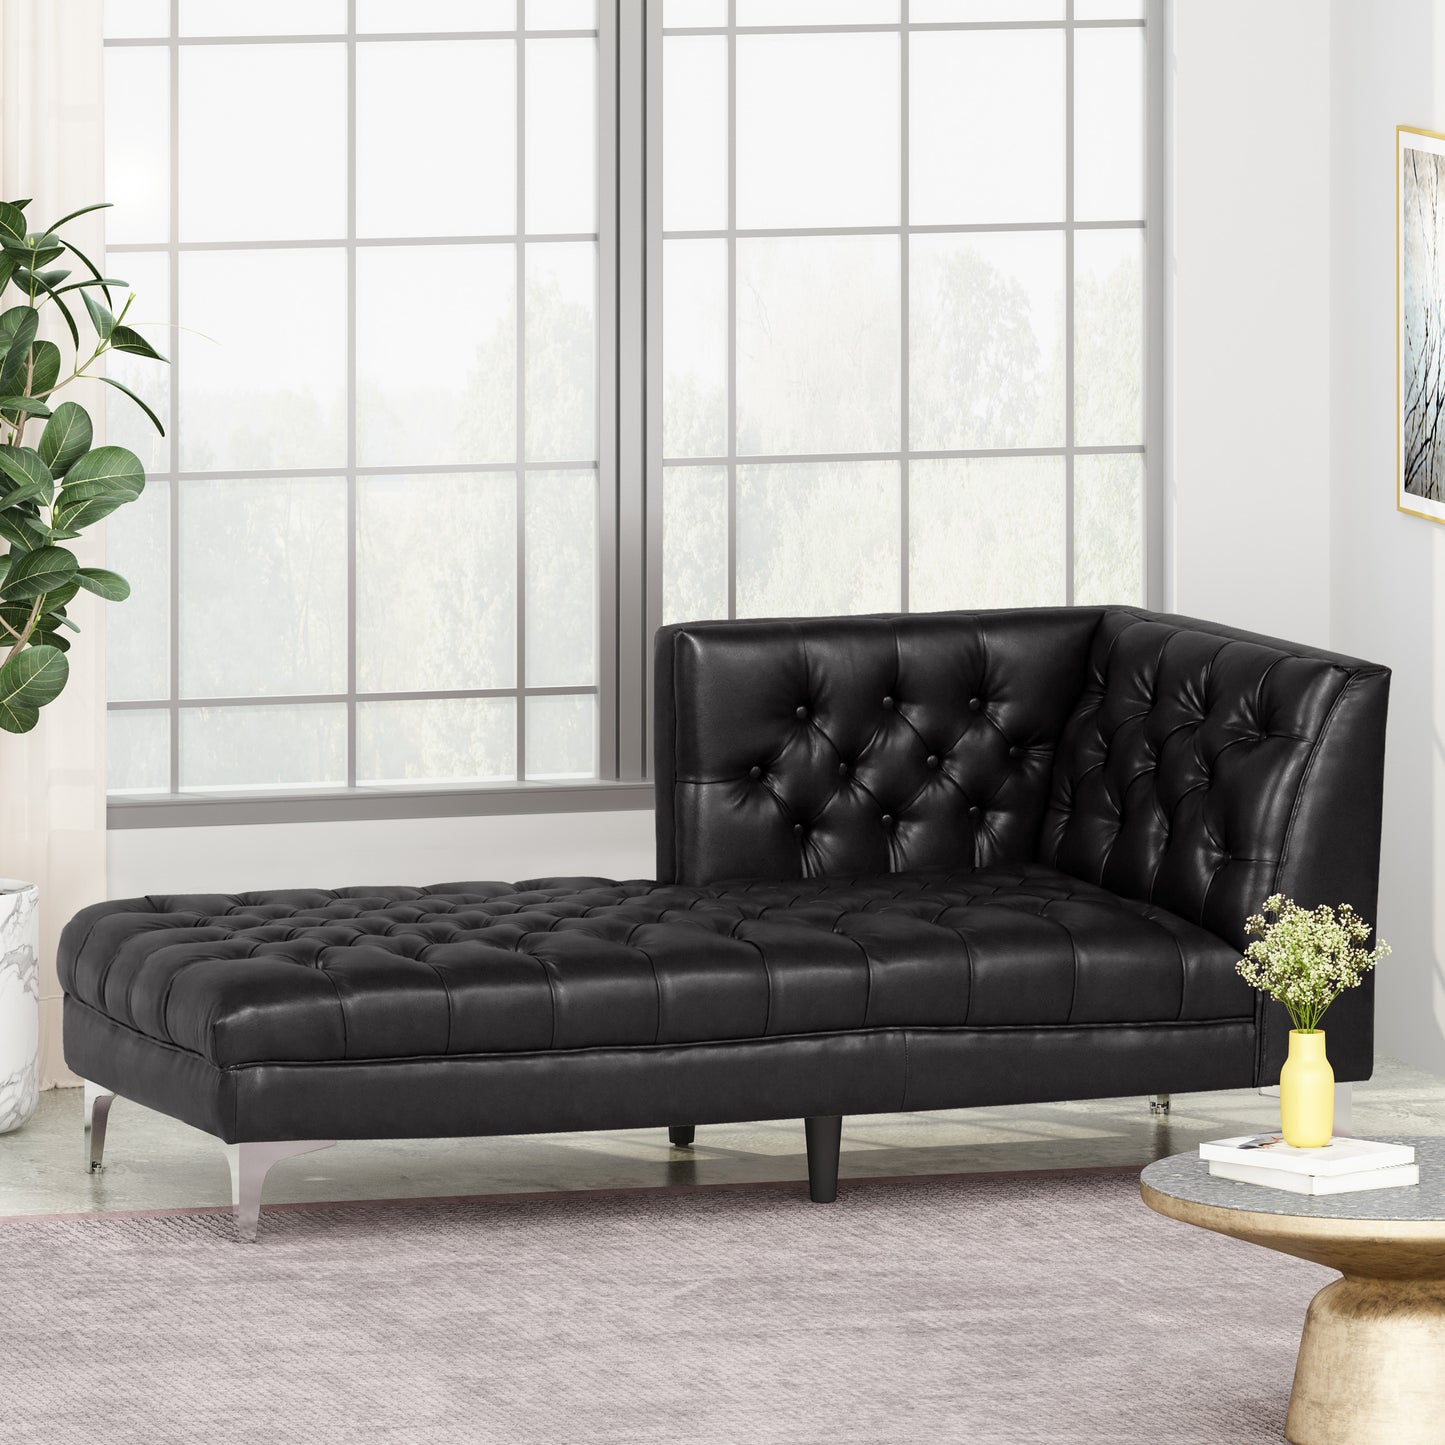 Bluffton Contemporary Tufted One Armed Chaise Lounge